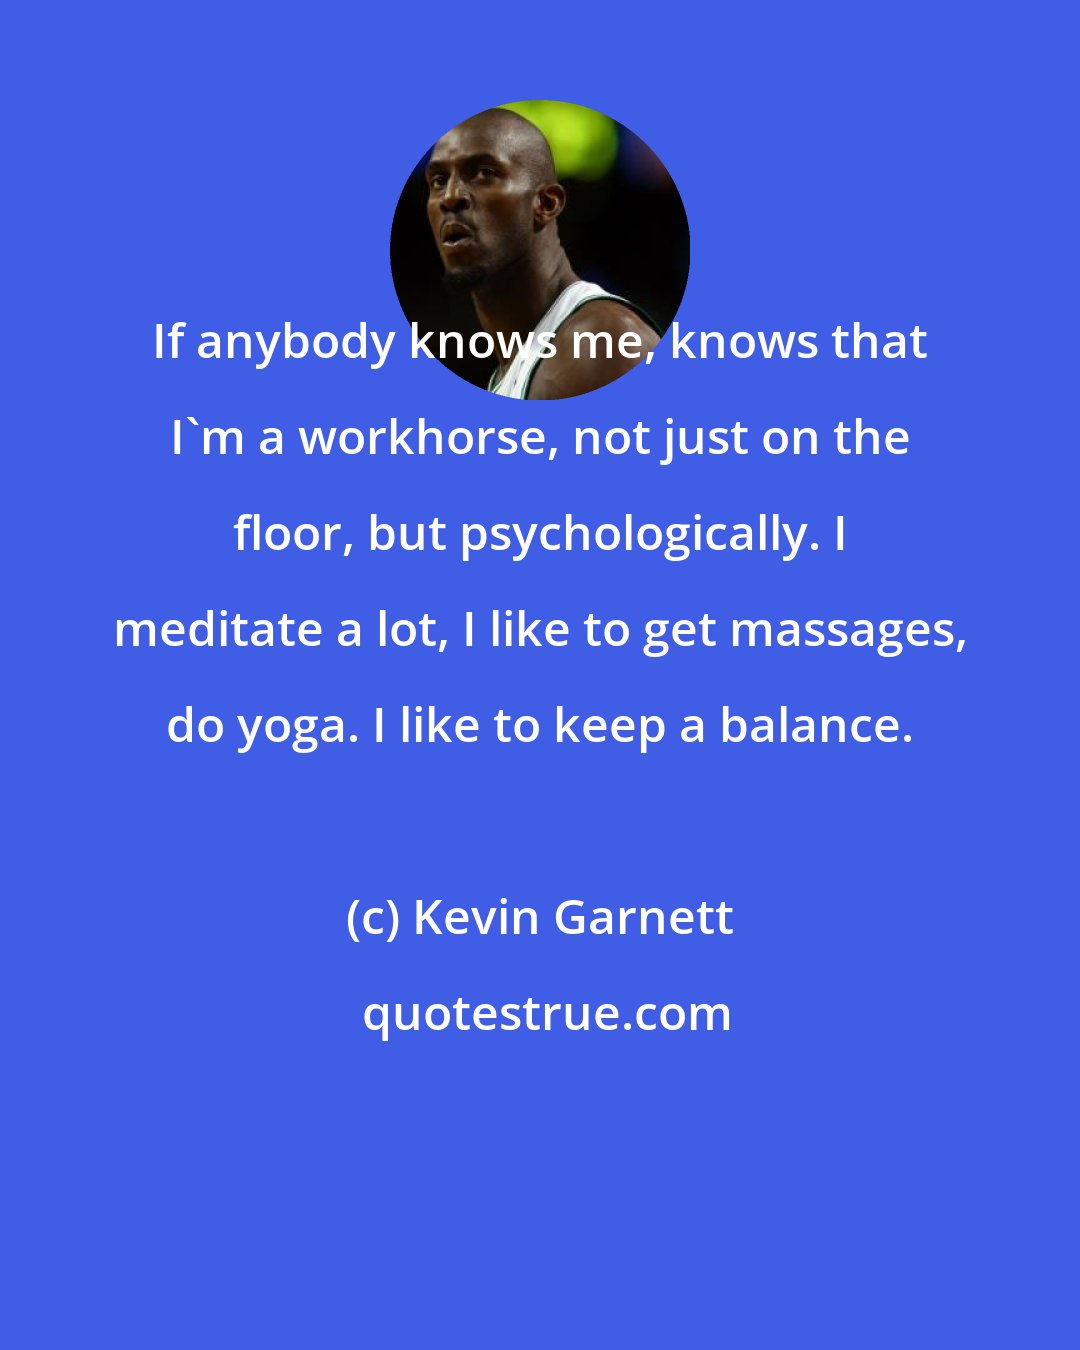 Kevin Garnett: If anybody knows me, knows that I'm a workhorse, not just on the floor, but psychologically. I meditate a lot, I like to get massages, do yoga. I like to keep a balance.